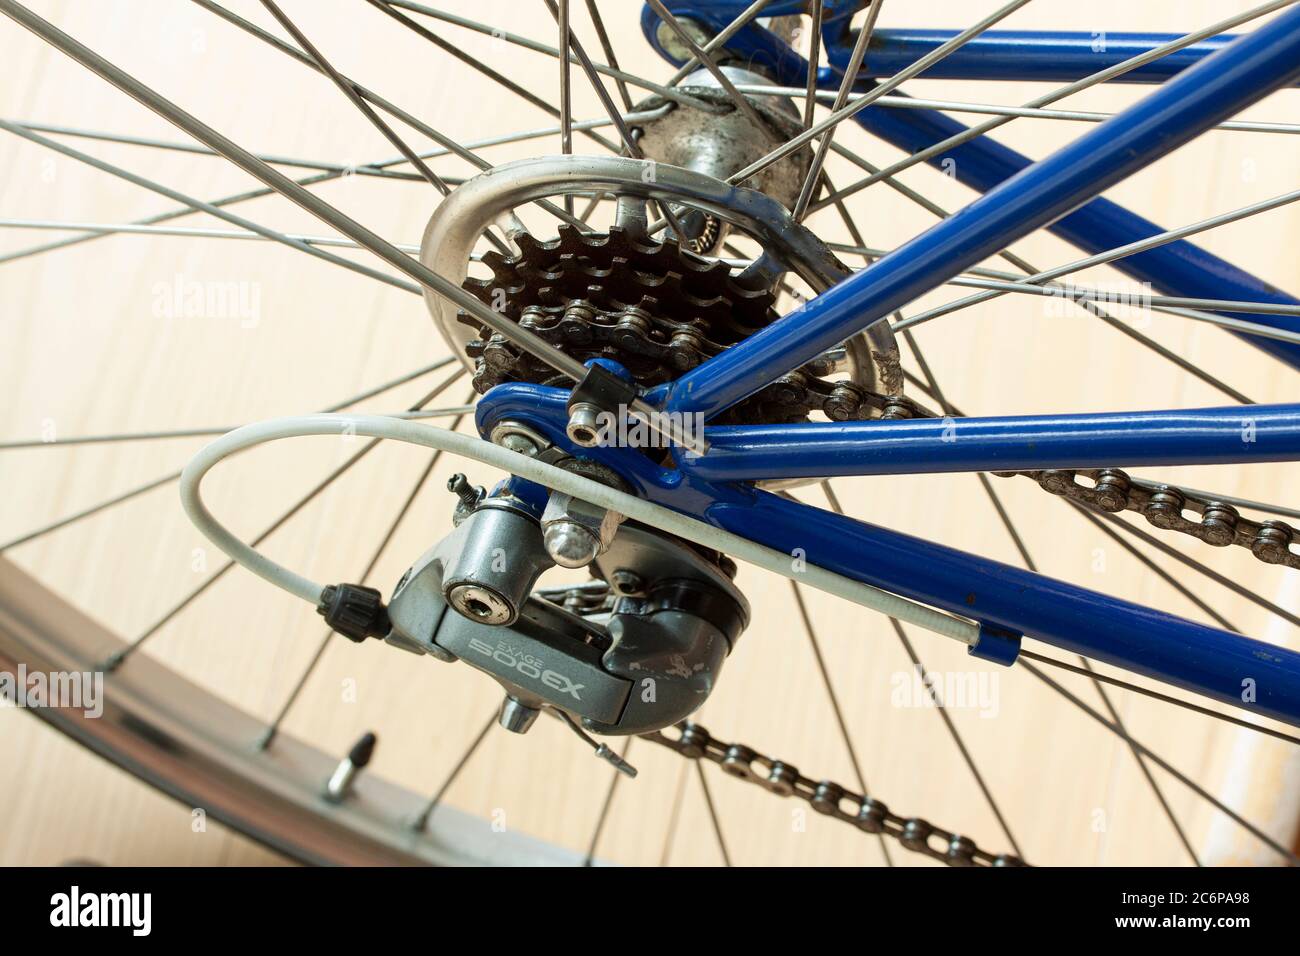 Shimano Exage 500 EX Rear Derailleur, spokes and chain on a sporty bicycle. Close-up image. Stock Photo